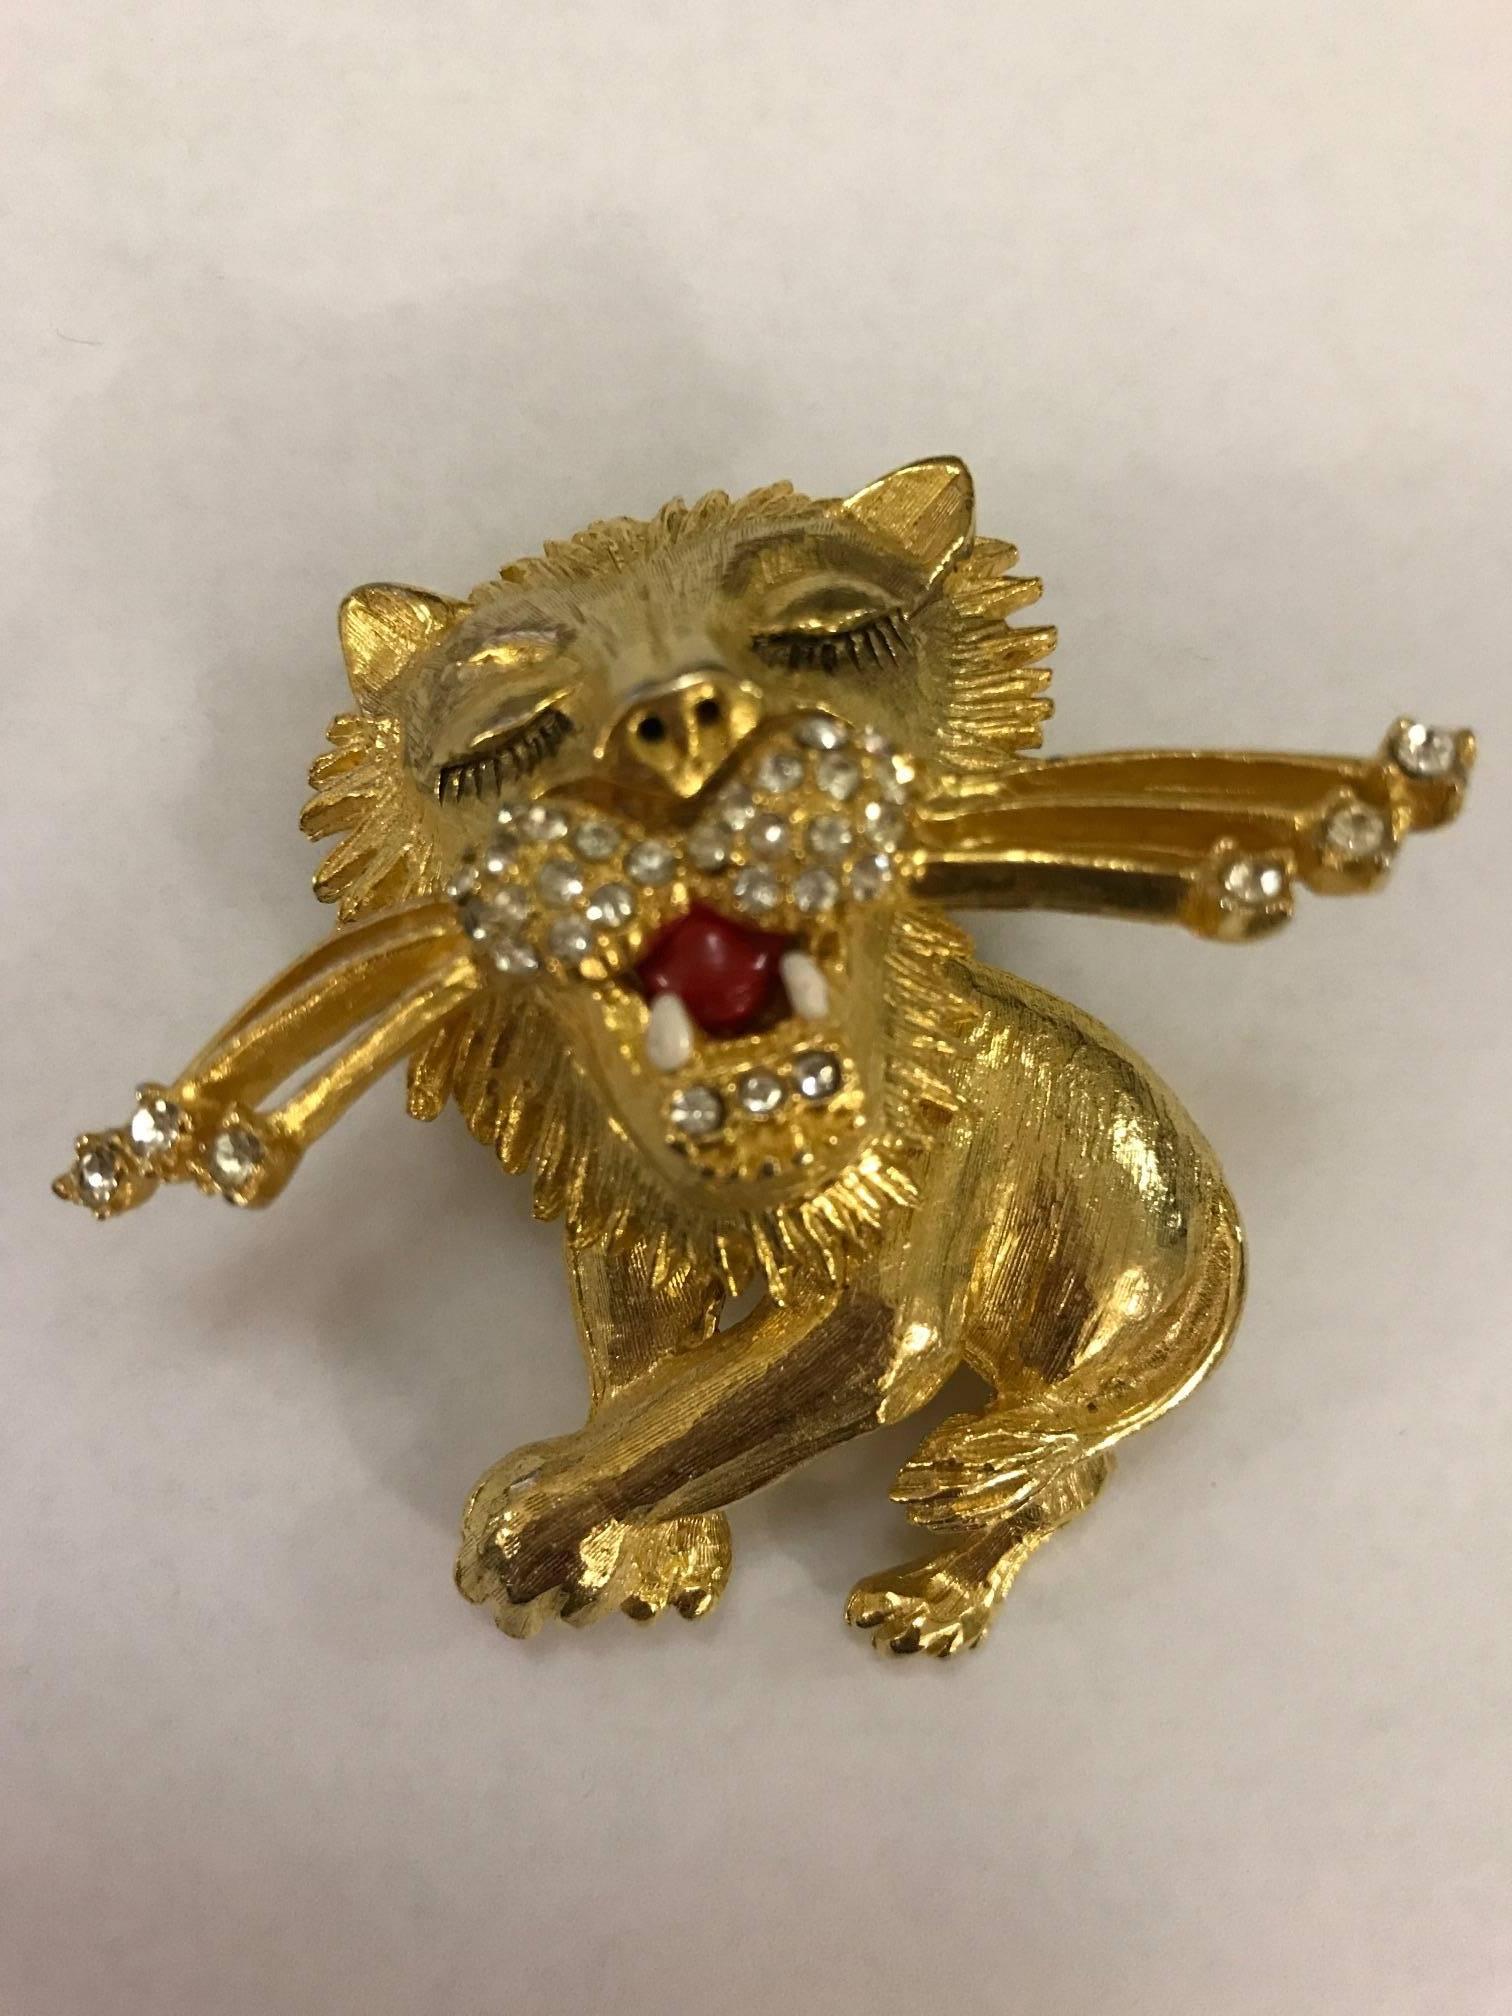 Gold tone vintage brooch features a rhinestone detailed lion prancing and batting his lashes.

Measures approximately 2 1/4" x 2 1/4".

Unsigned.

Excellent condition, no flaws to note.